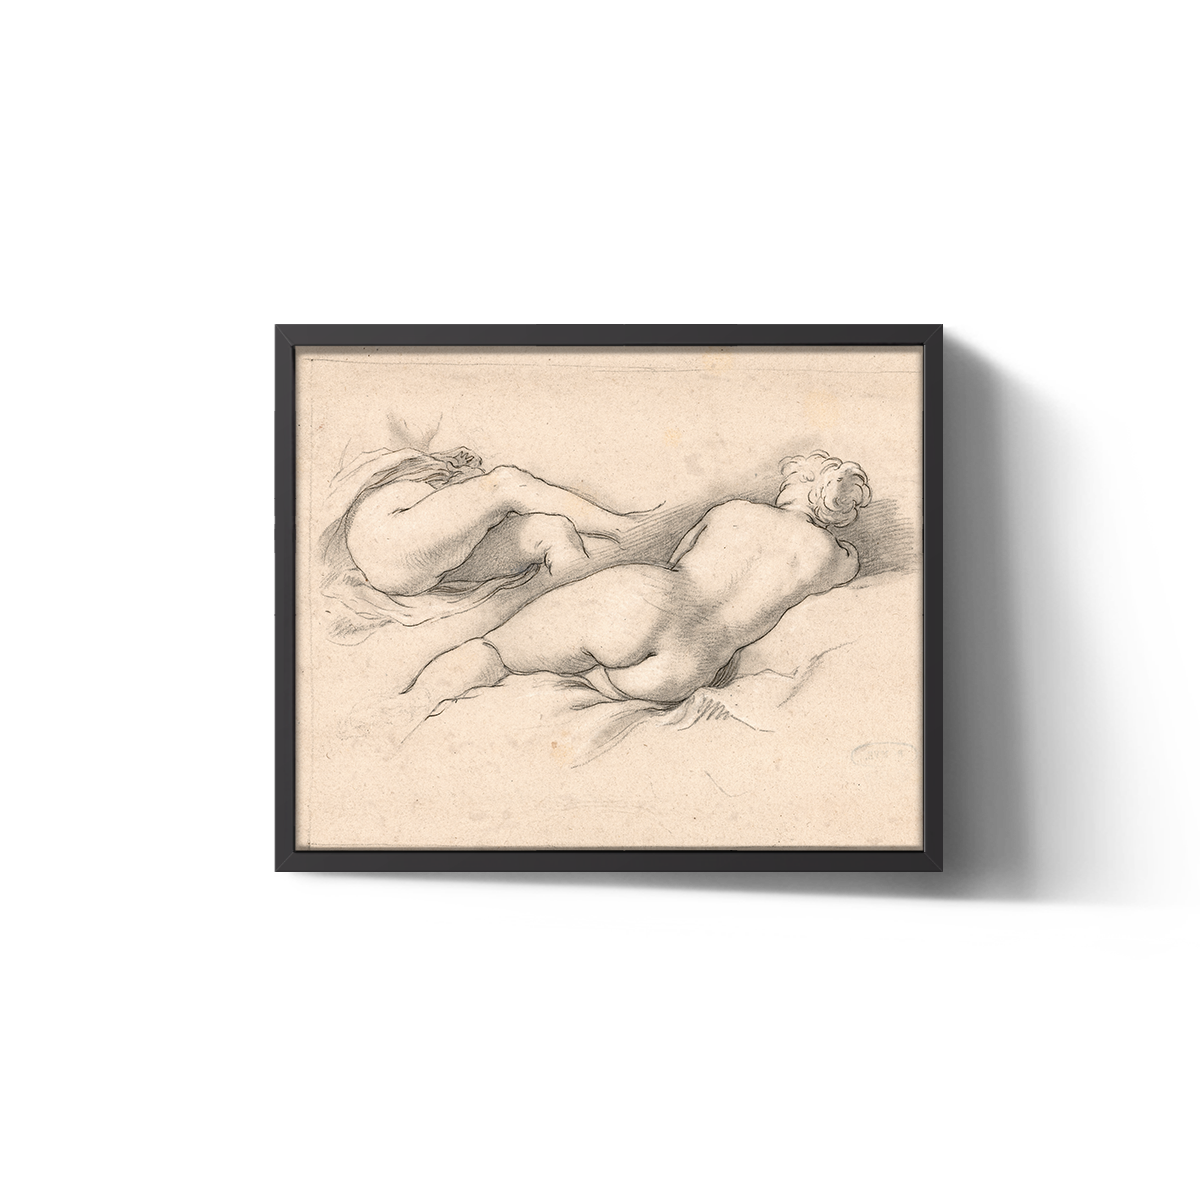 STUDIES OF A RECLINING FEMALE NUDE I